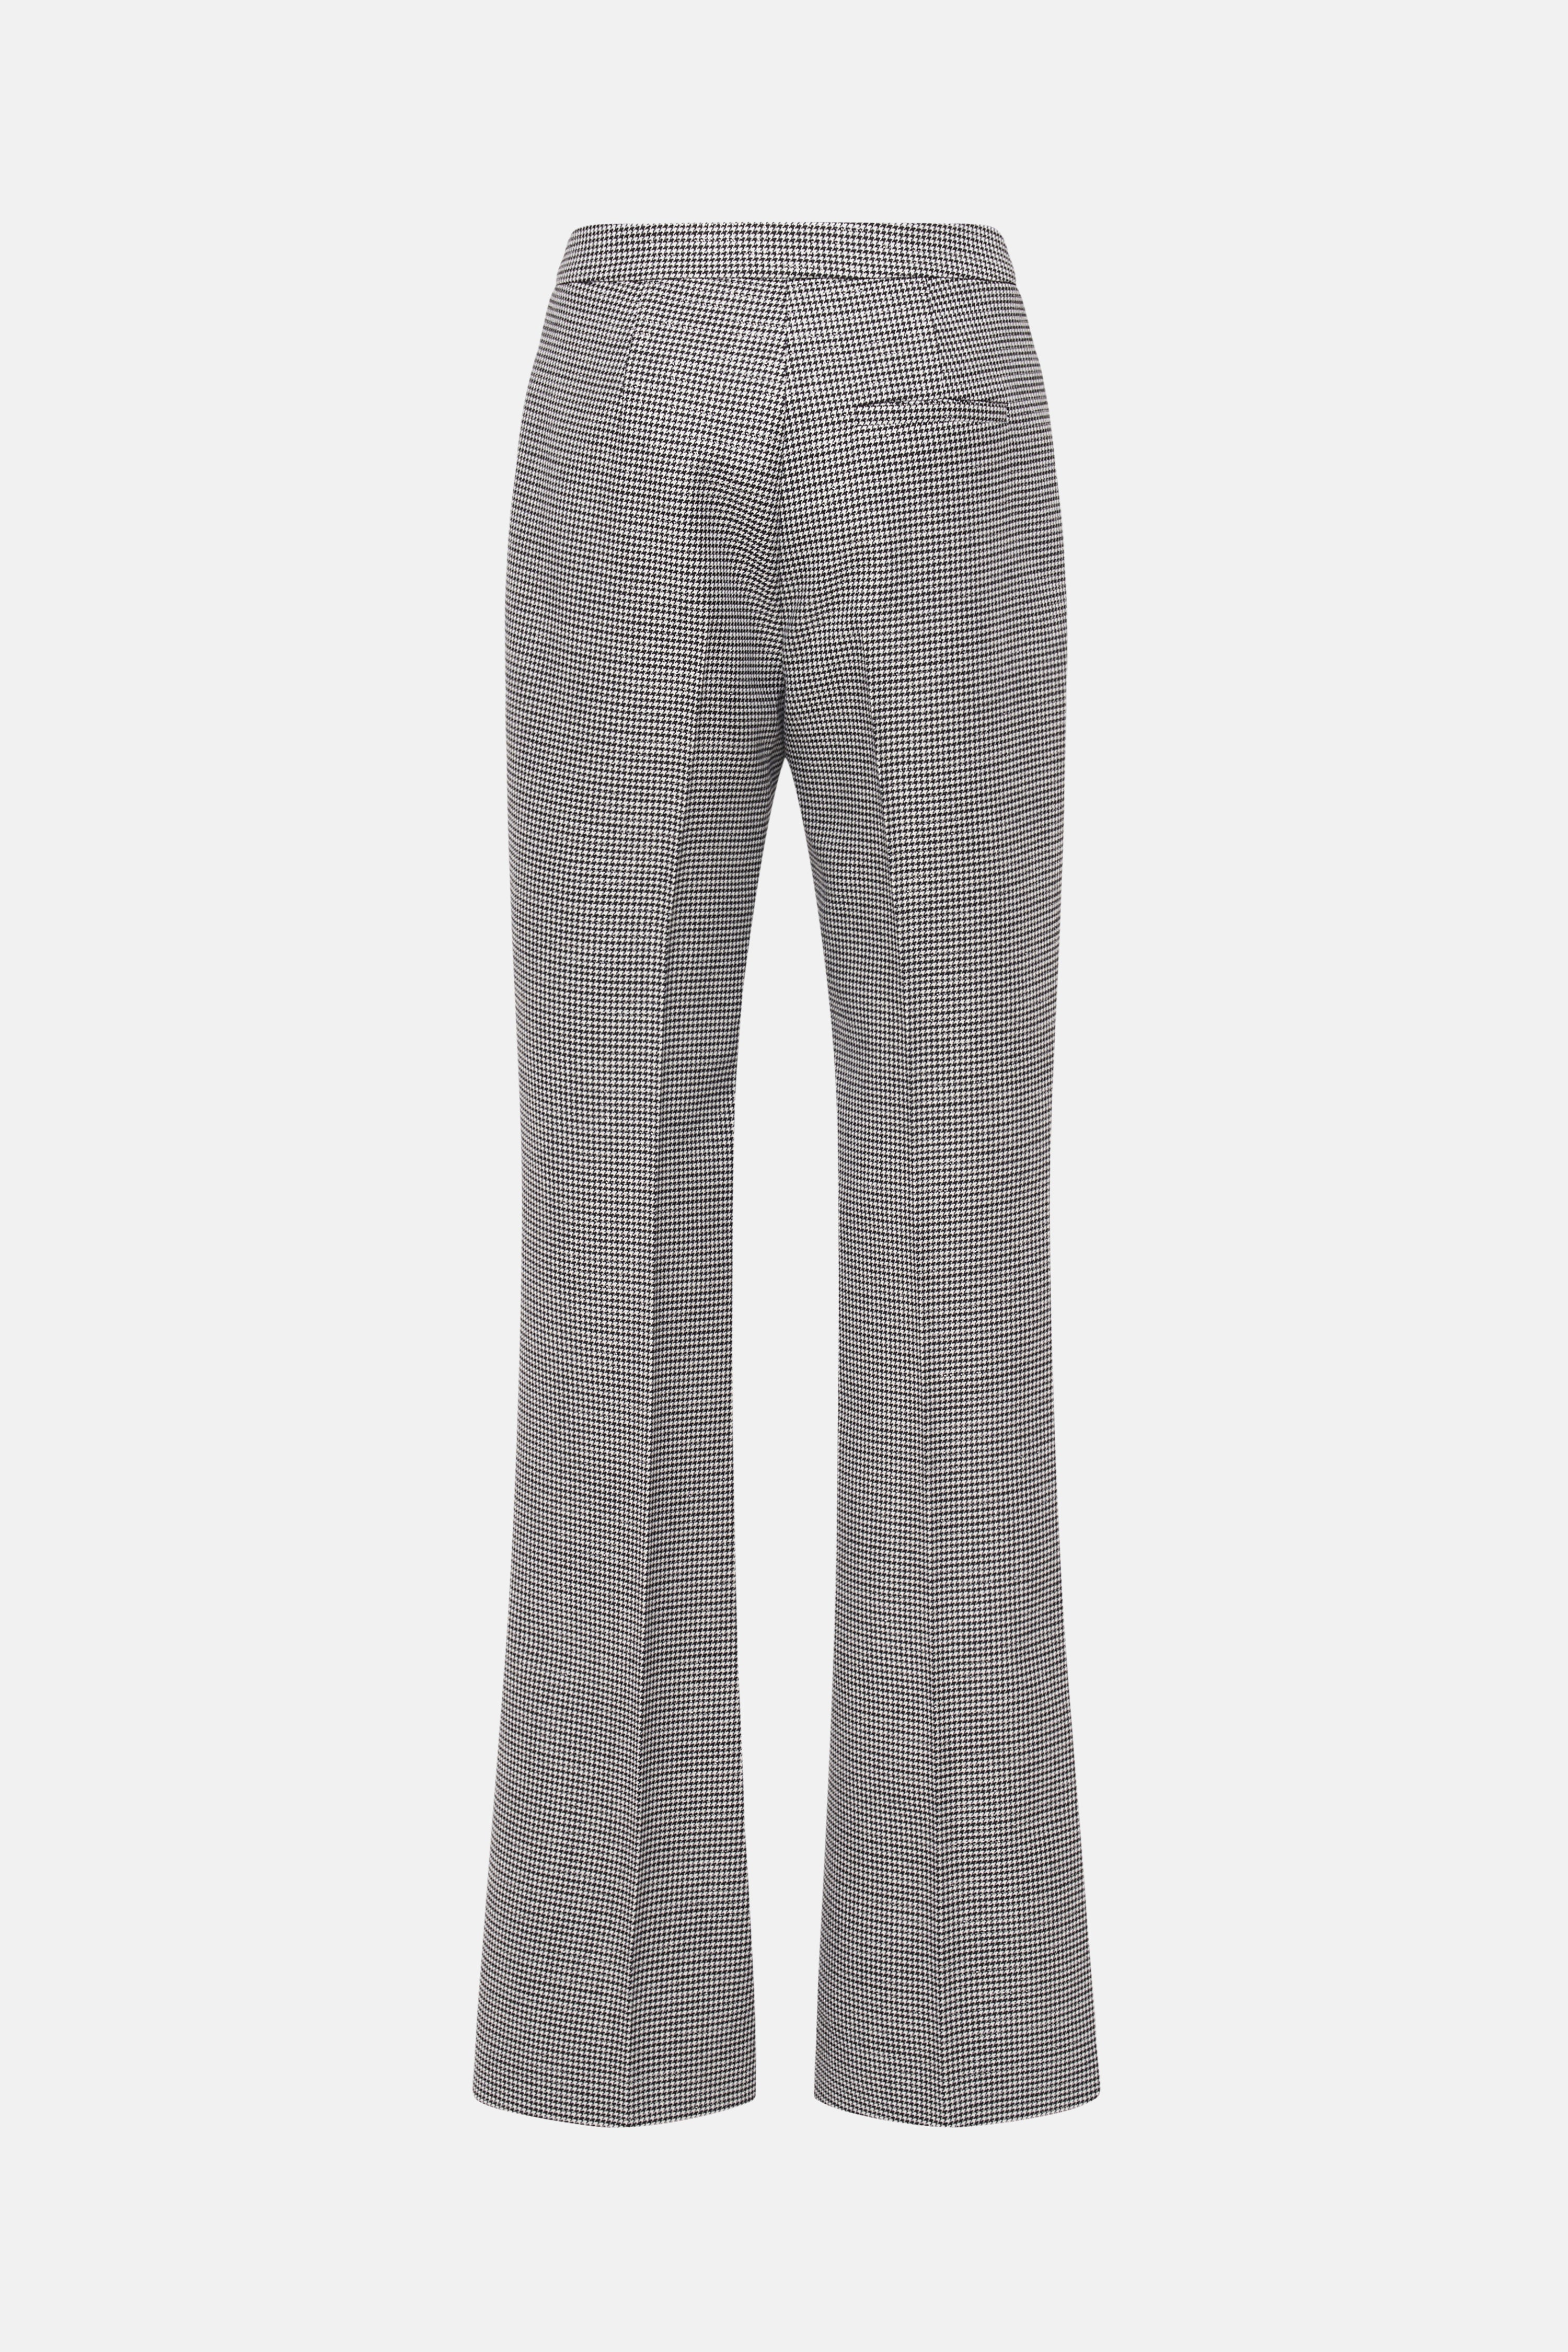 LUREX WOOL PIED DE POULE HIGH WAISTED TROUSERS